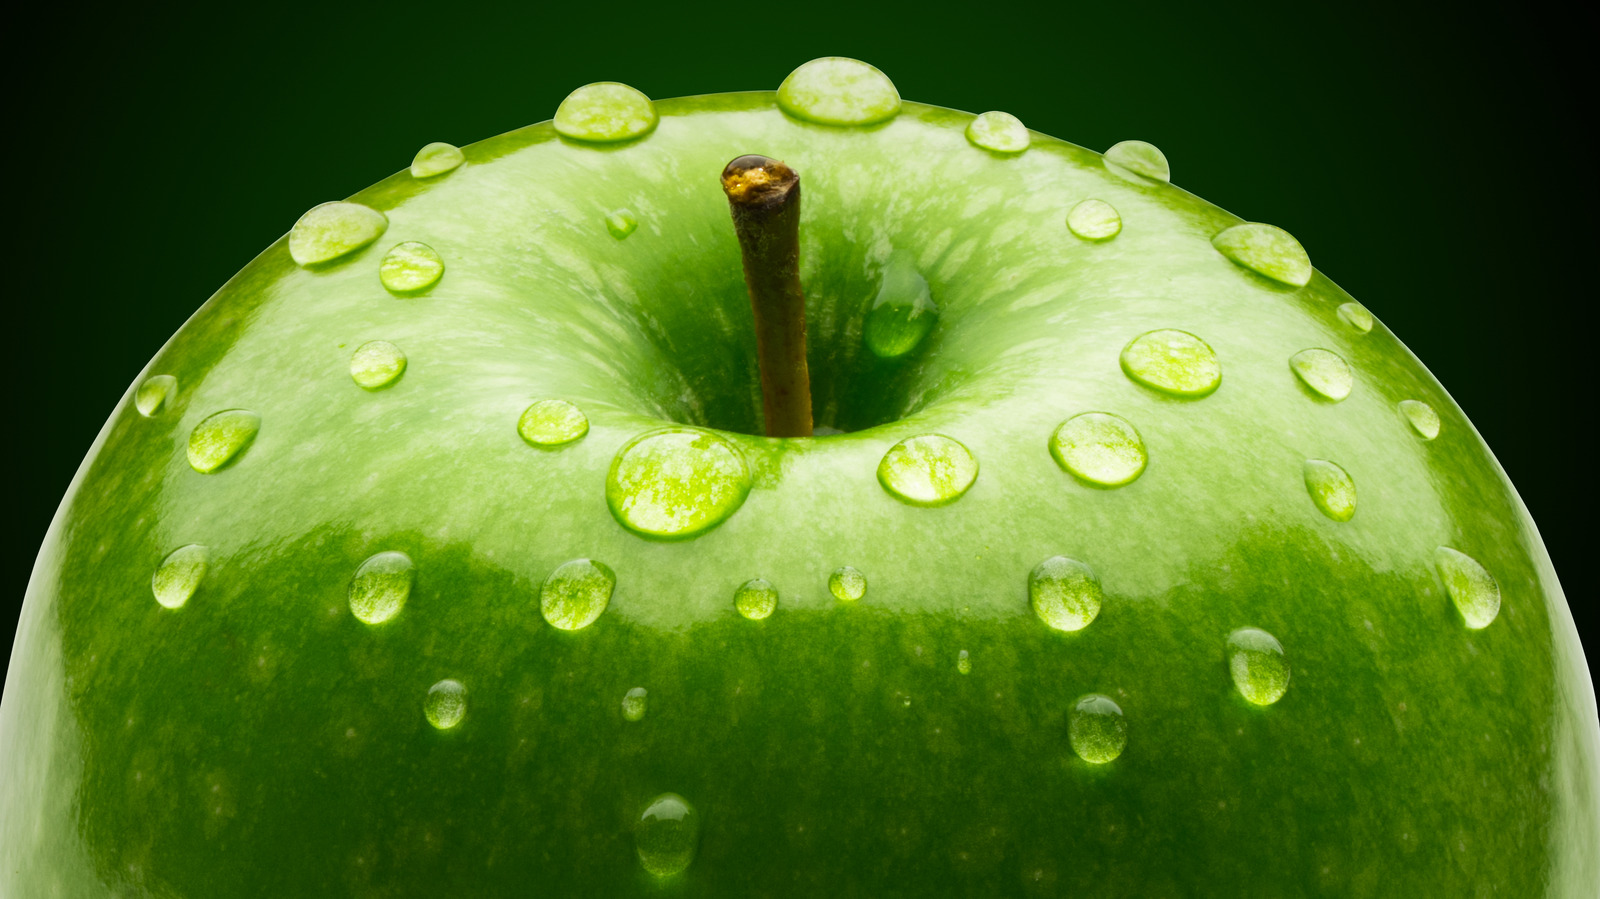 https://www.tastingtable.com/img/gallery/was-the-granny-smith-apple-named-after-a-real-person/l-intro-1665936043.jpg